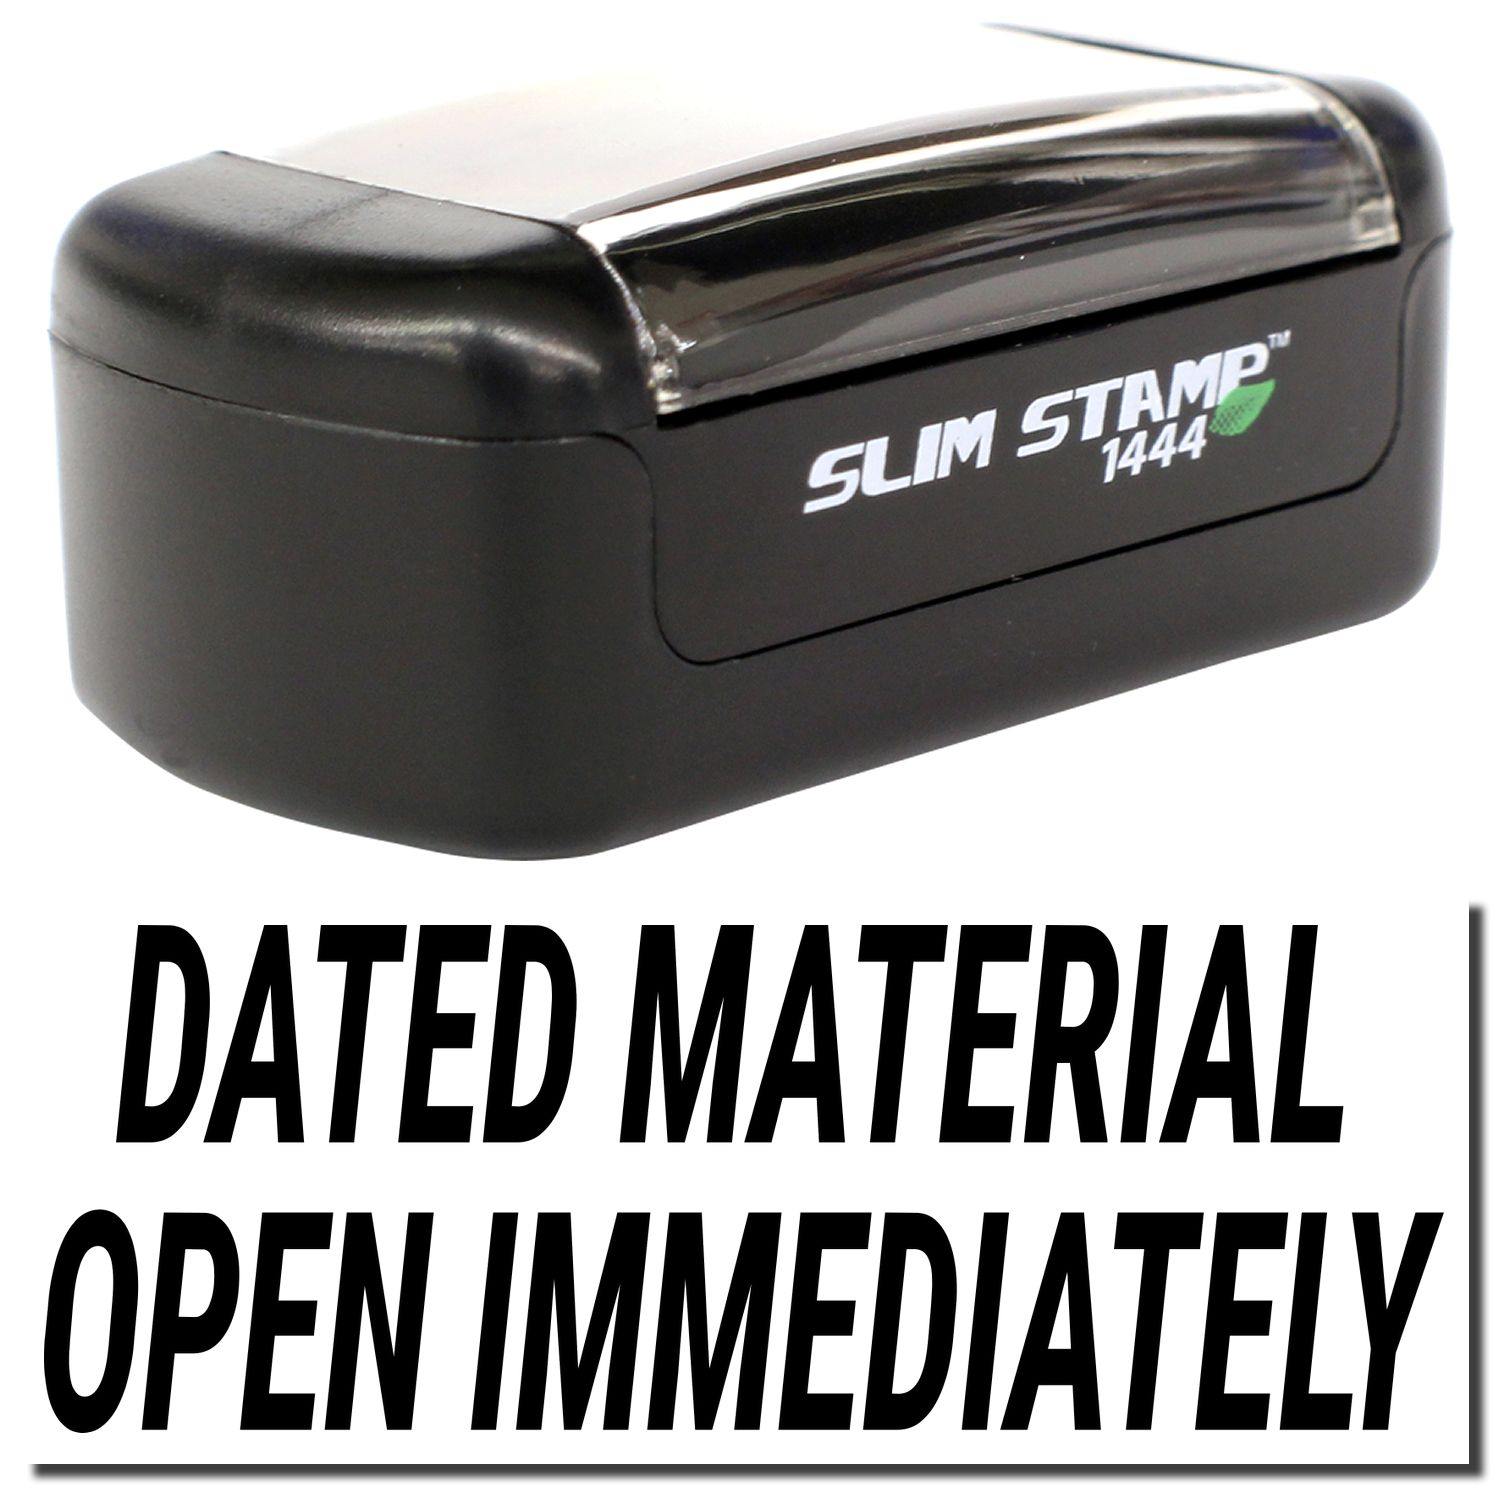 A stock office pre-inked stamp with a stamped image showing how the text "DATED MATERIAL OPEN IMMEDIATELY" is displayed after stamping.